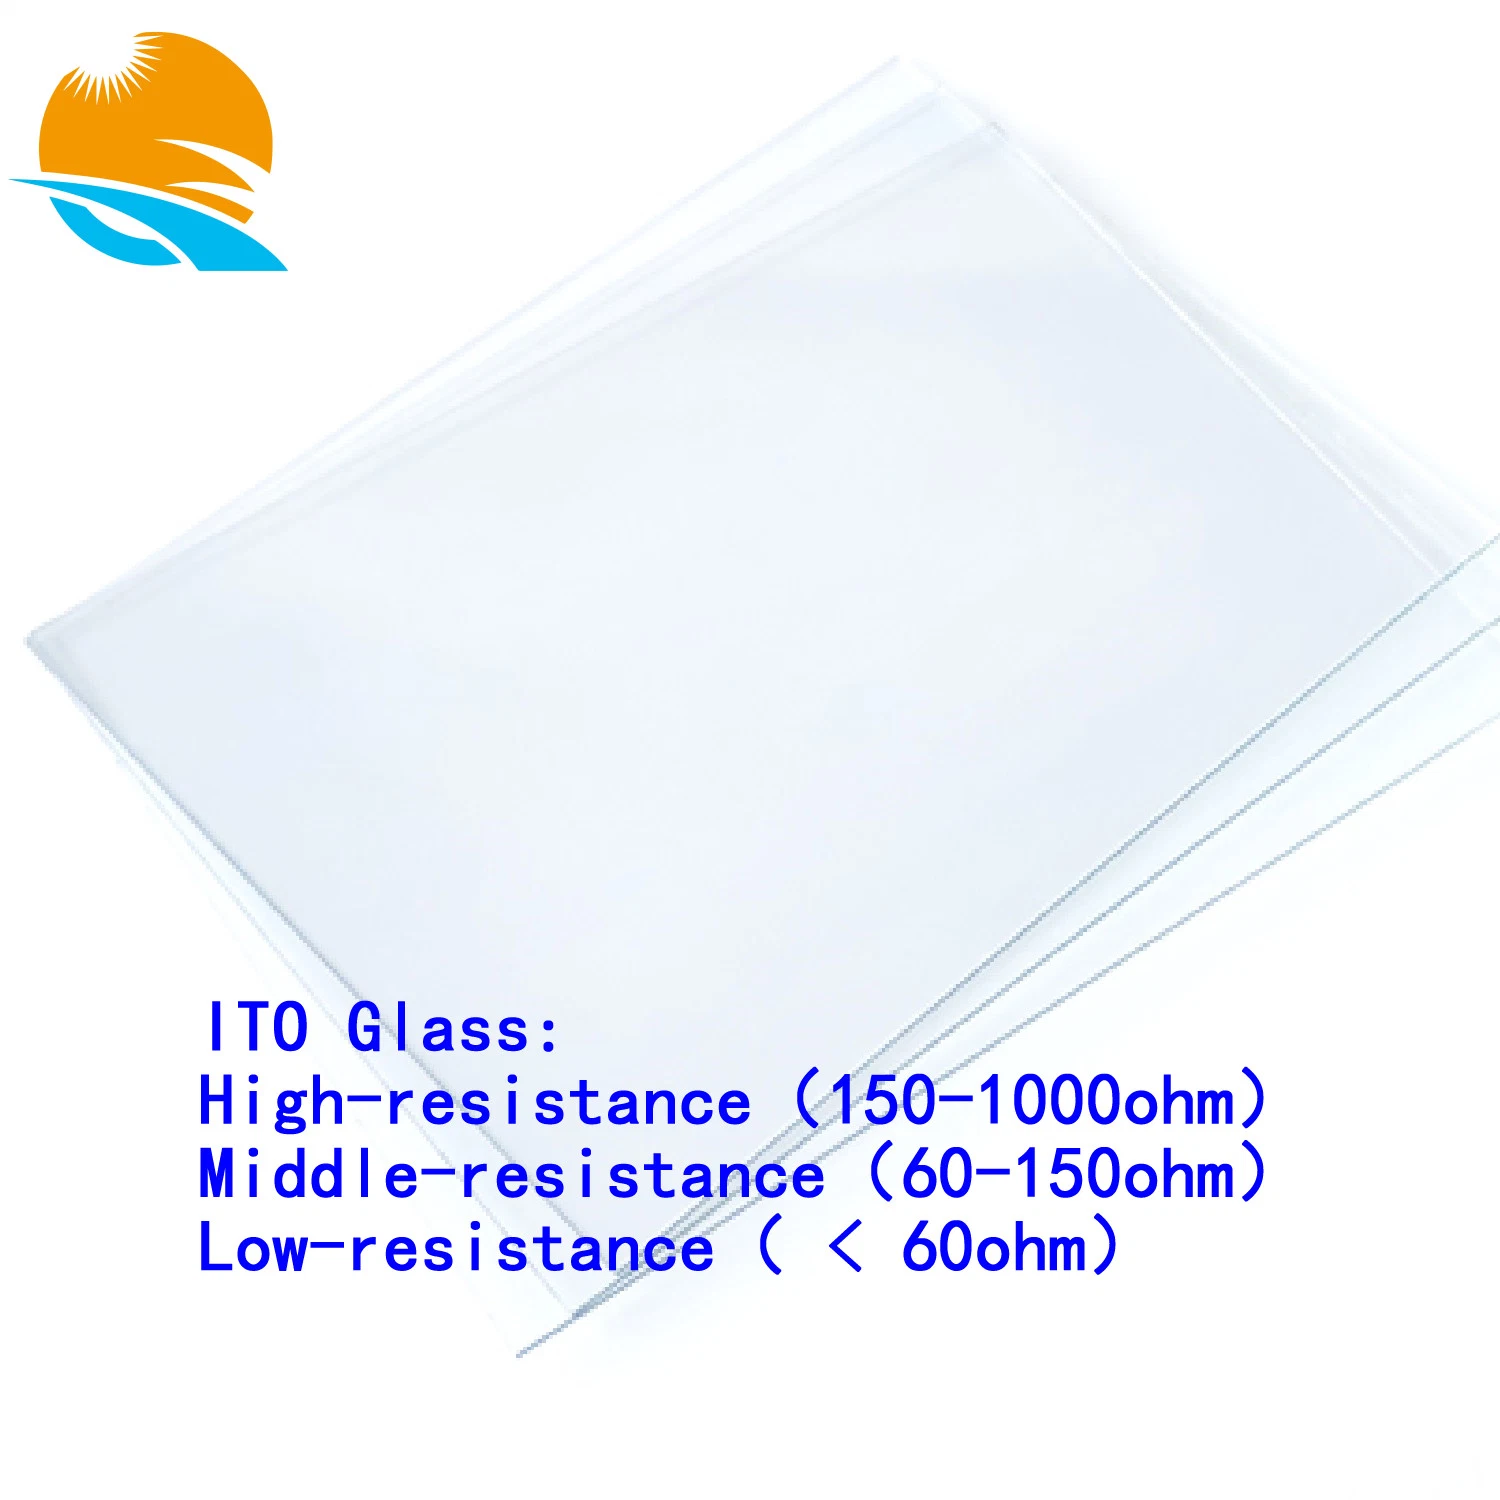 Customized	Laboratory		Transparent Heating	Electrical Heated	Defogging	Anti-Glare Anti-Fog	Shielding		Thickness	2.8mm	Resistance	17~22 Ohm	ITO Conductive Glass